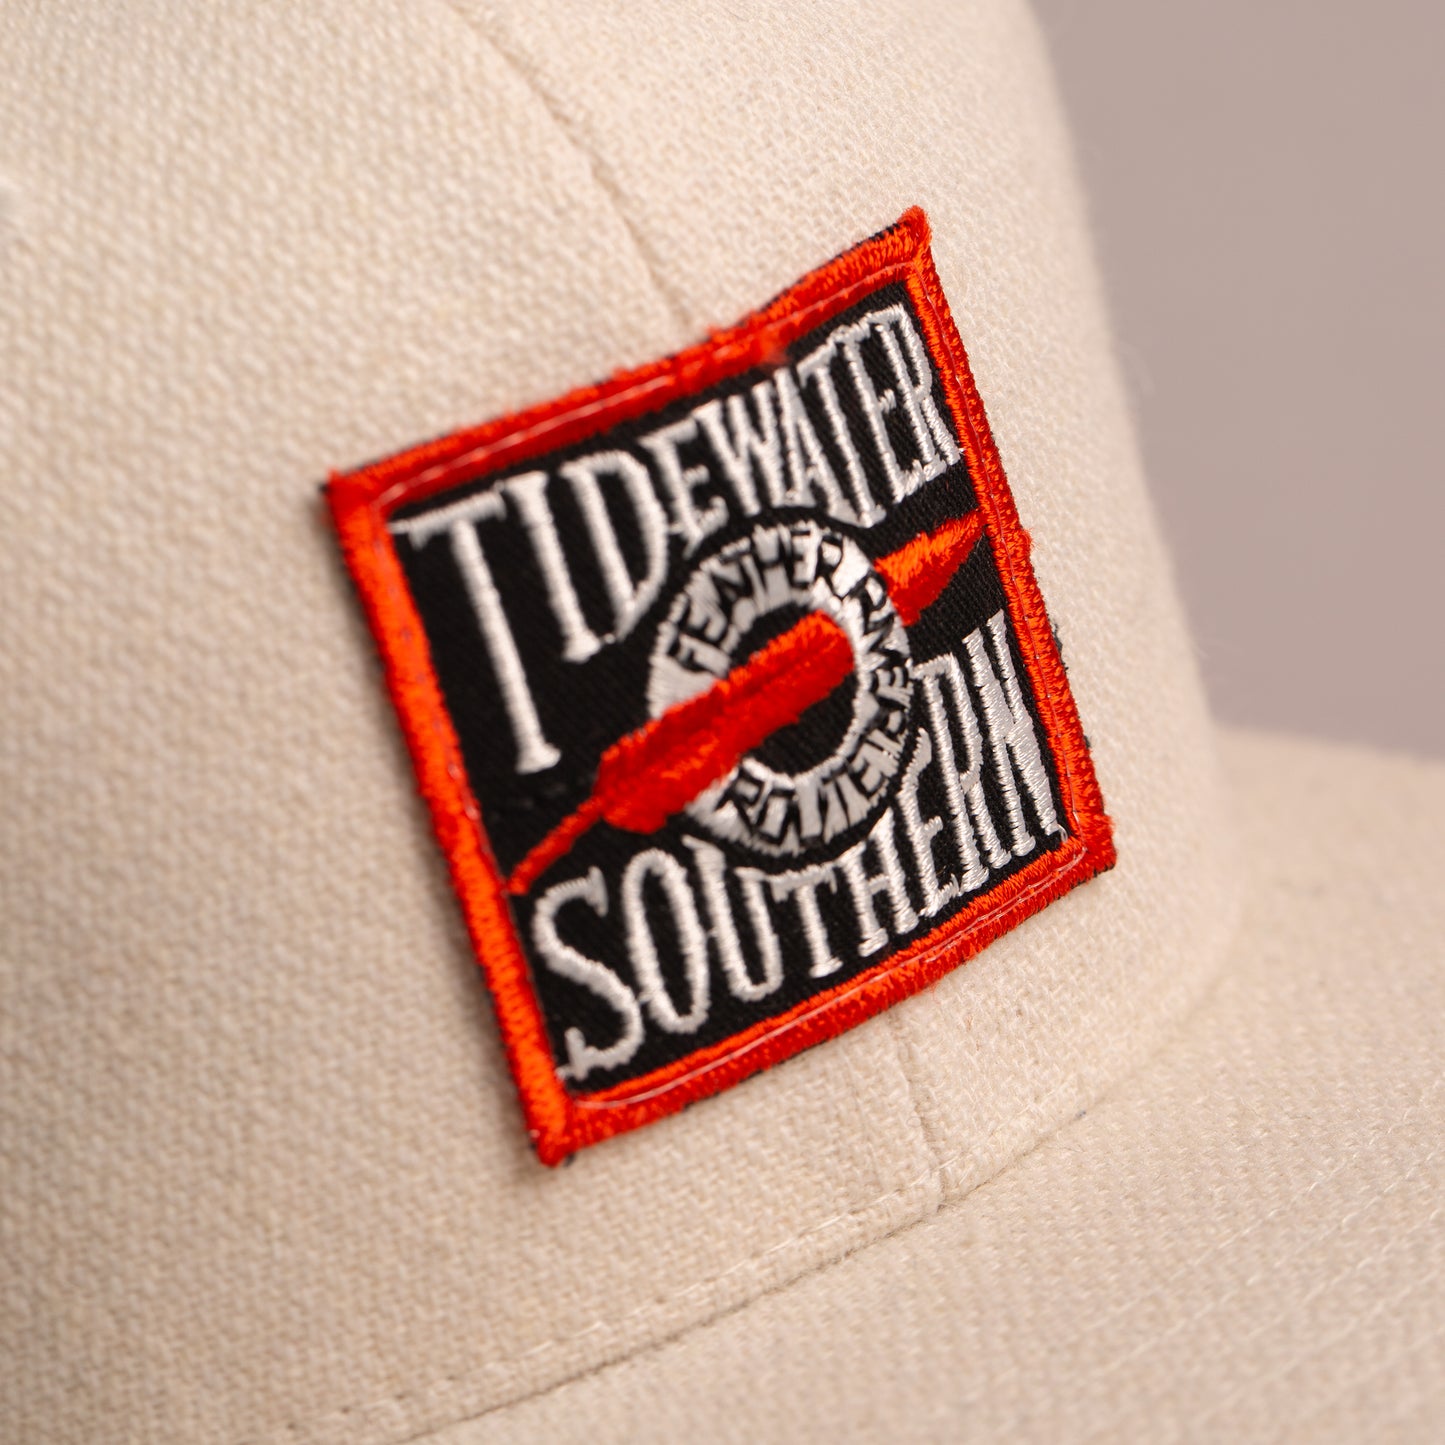 Tidewater Southern